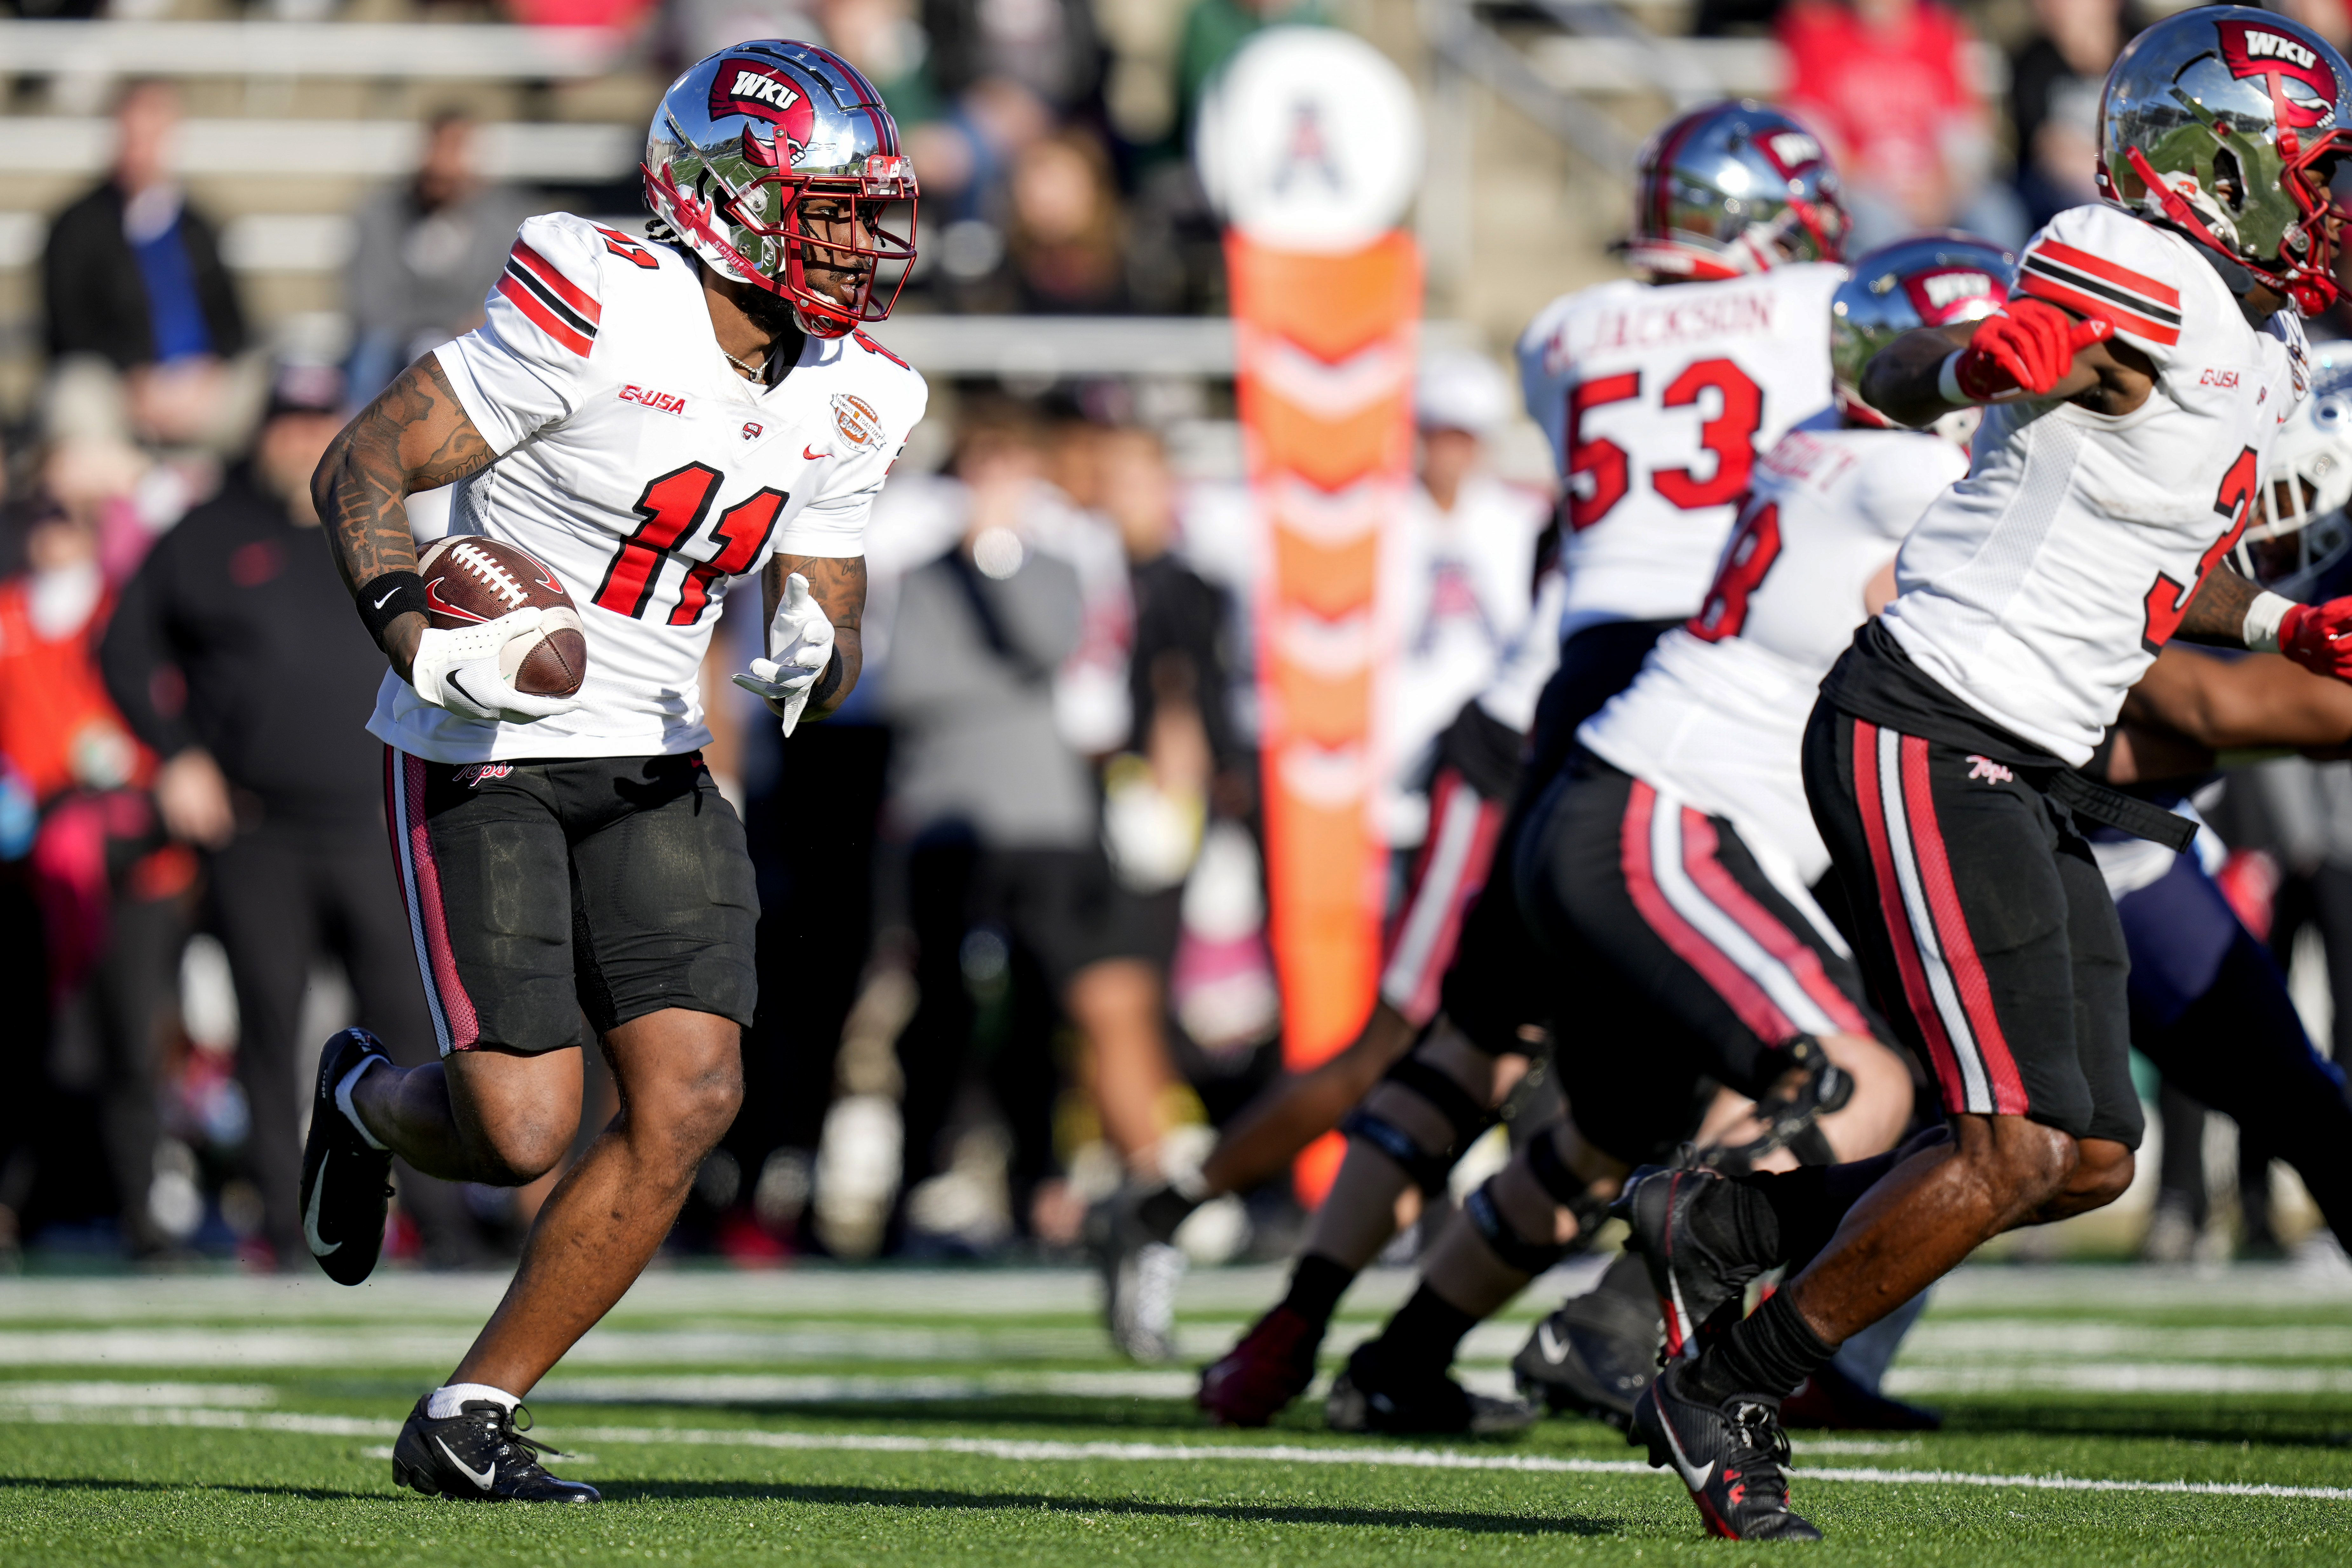 Western Kentucky Hilltoppers wide receiver Malachi Corley (New York Giants)